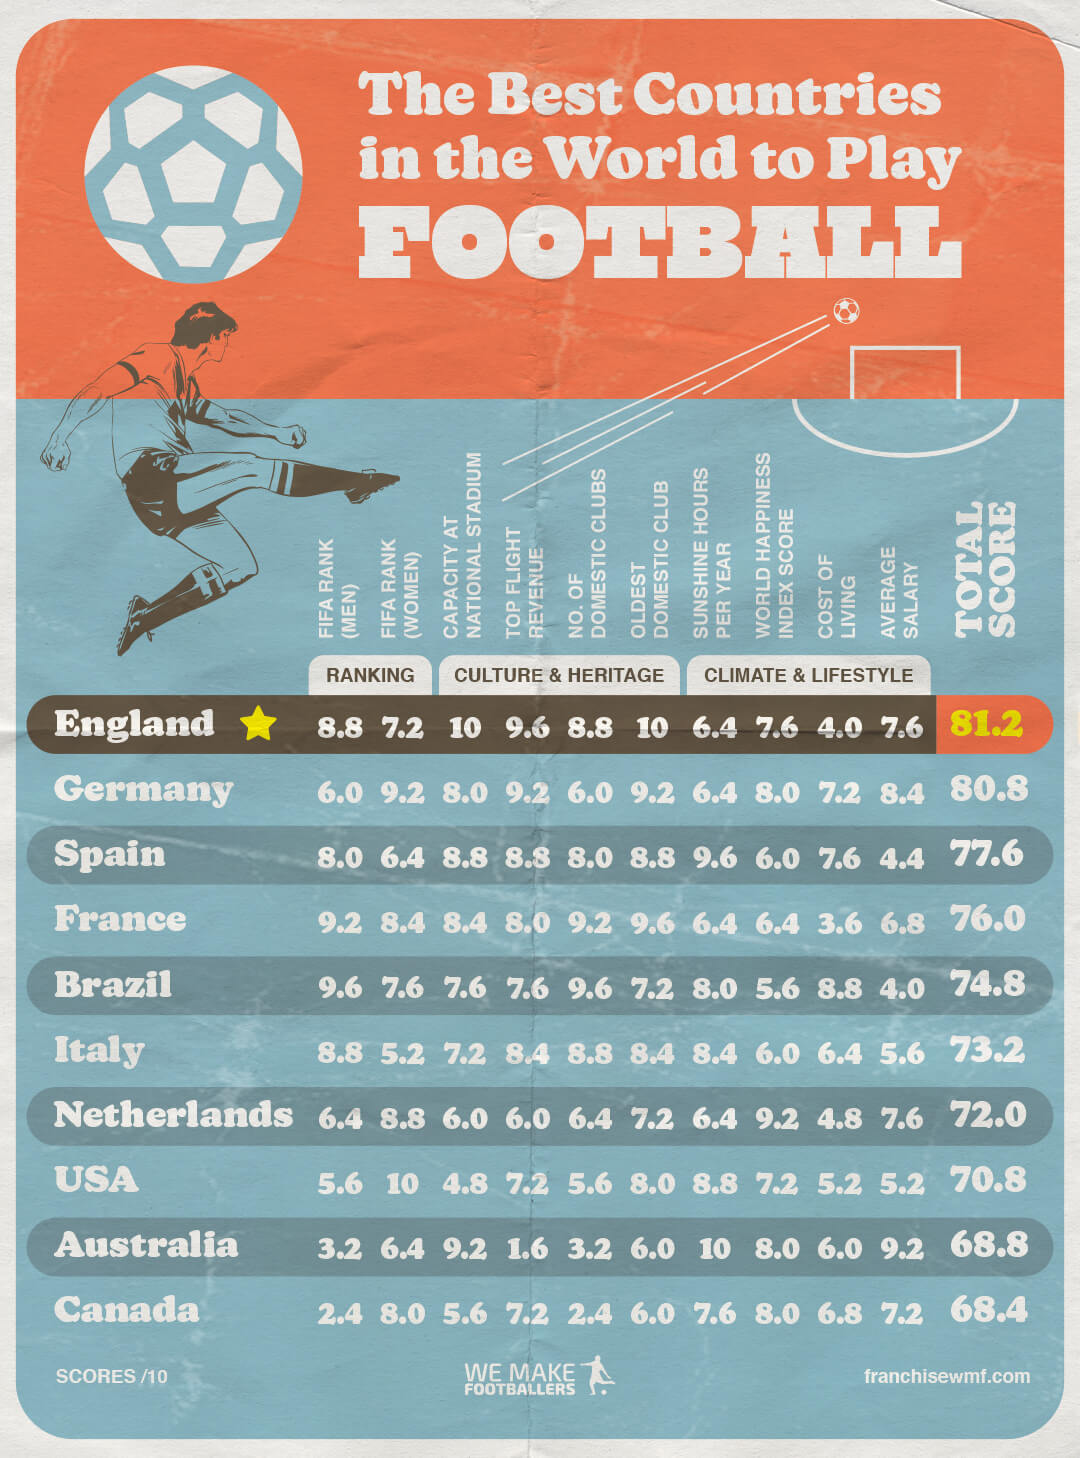 Which Is the Country in World to Play Football In? - We Make Footballers Franchising